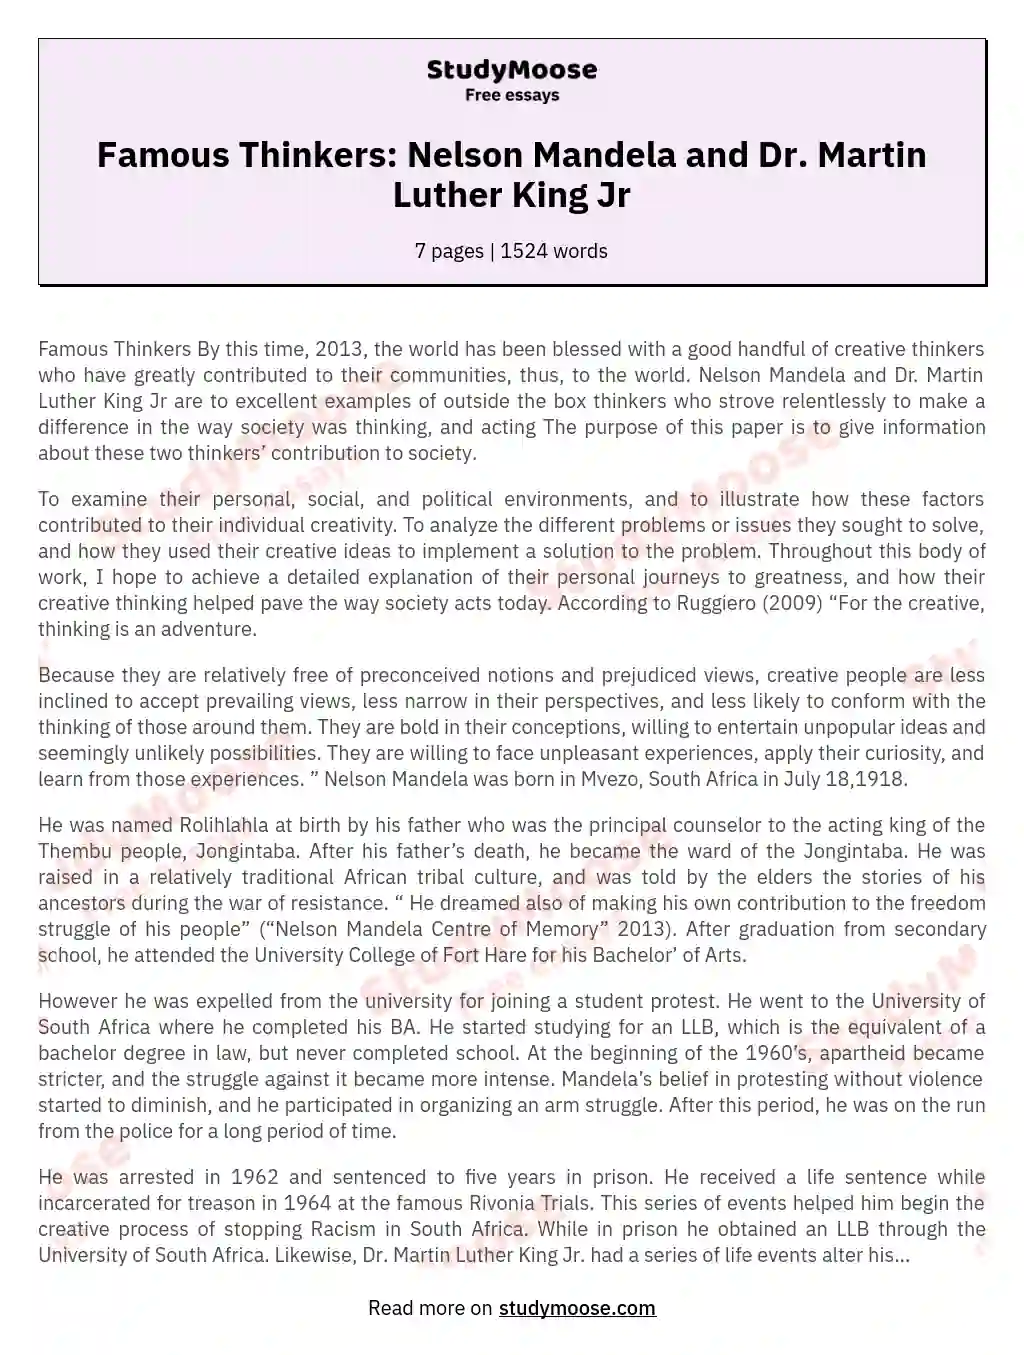 nelson mandela and martin luther king essay